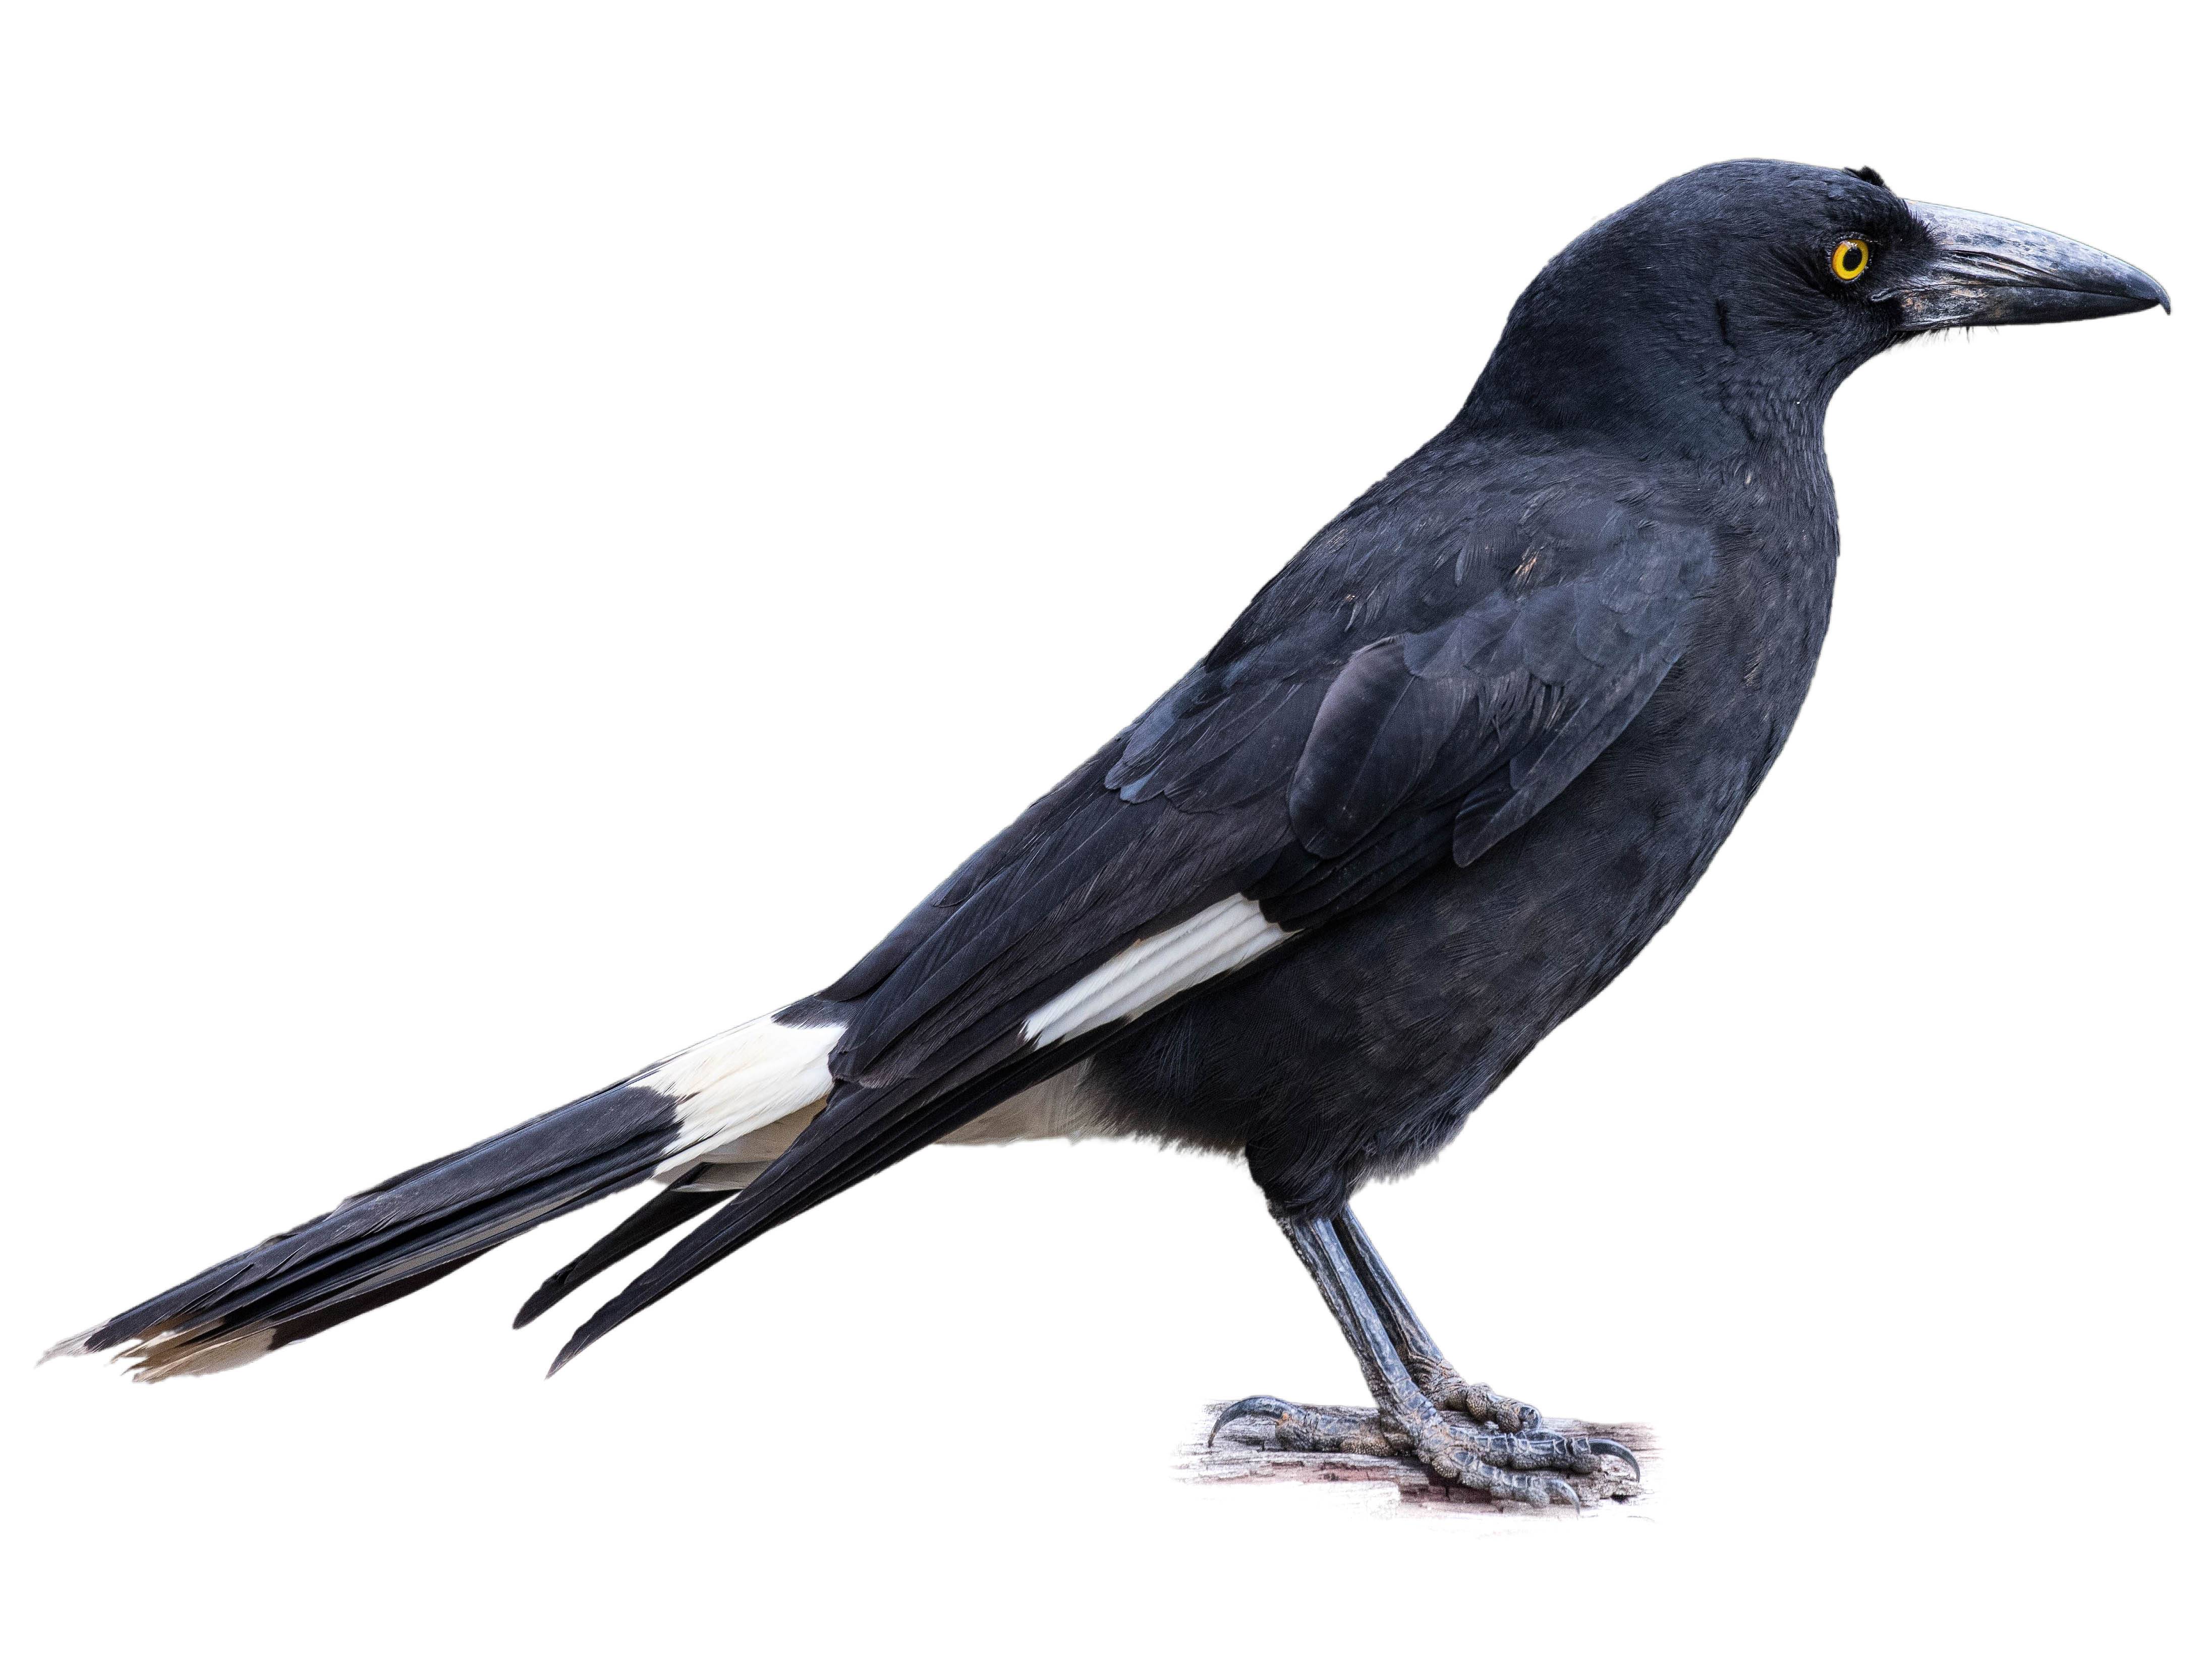 A photo of a Pied Currawong (Strepera graculina)